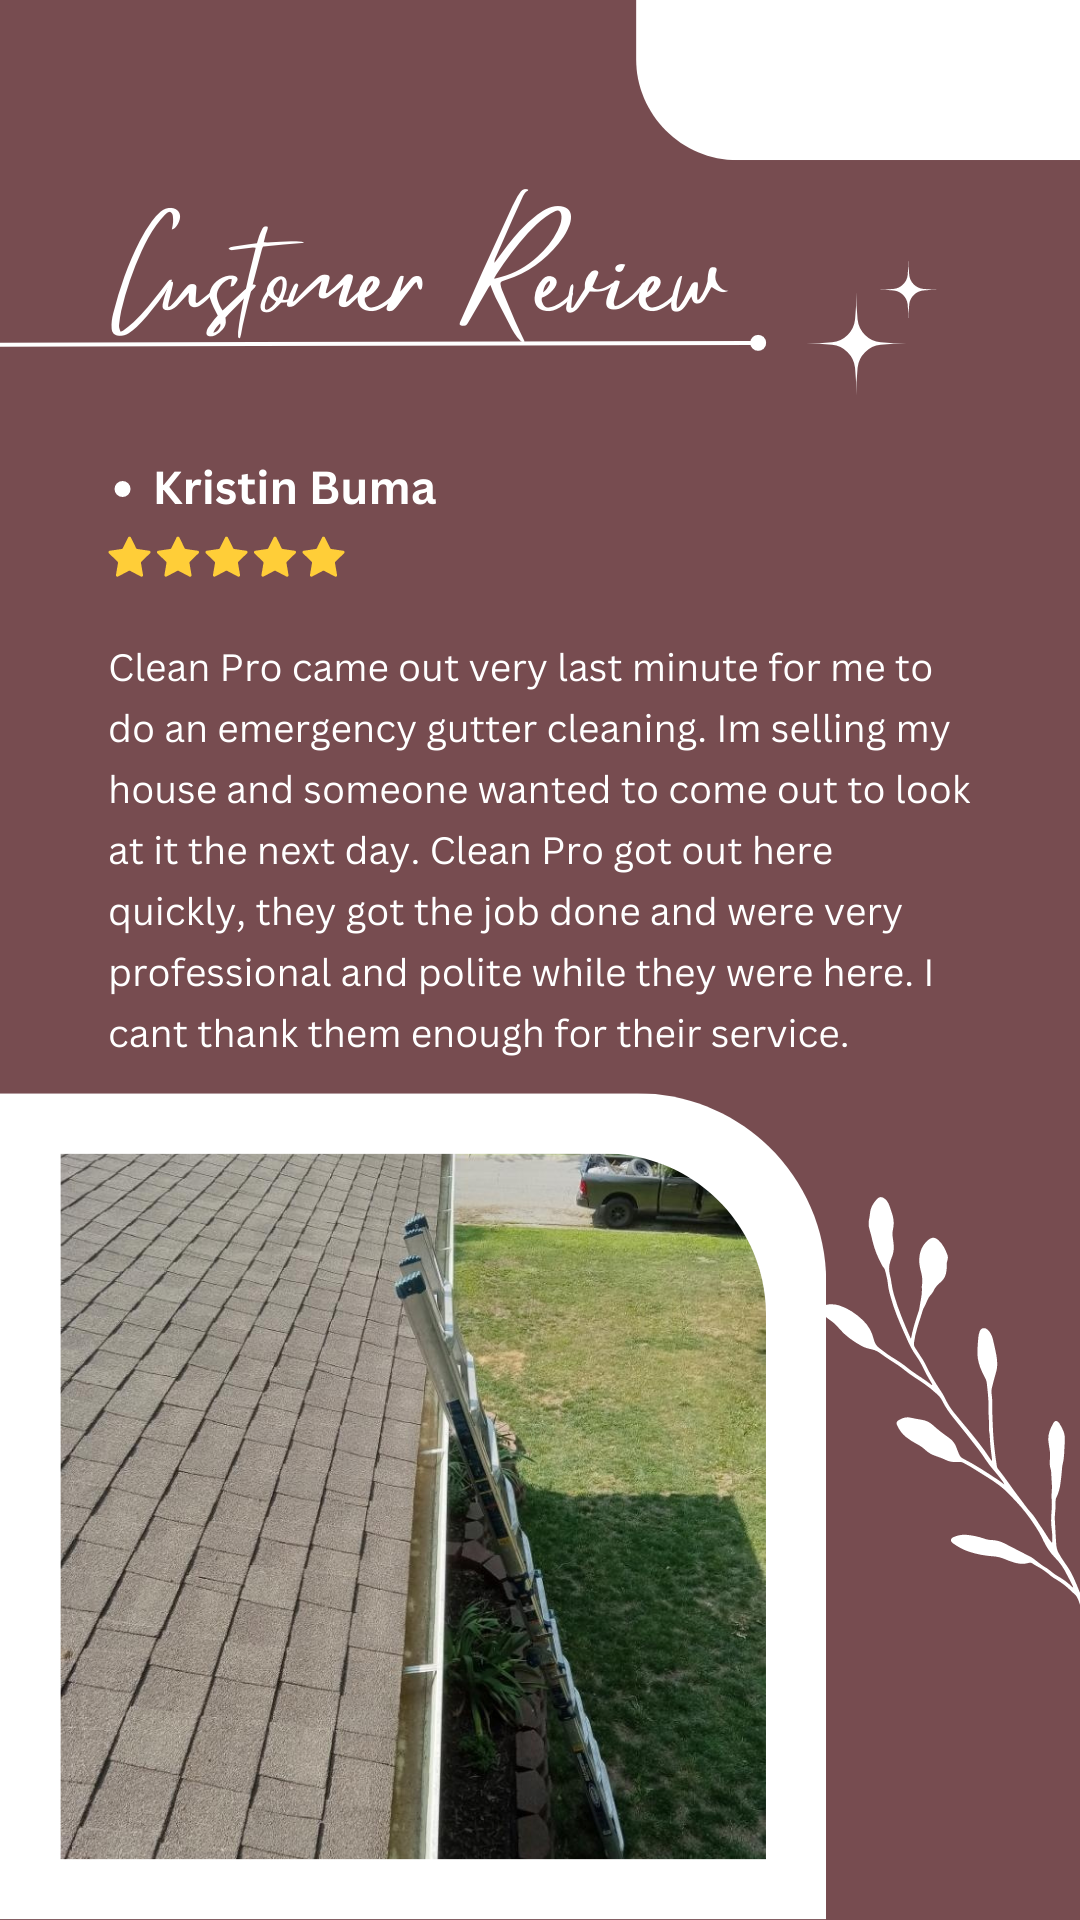 Kristin from Little Rock,AR gives us a 5 star review for a recent gutter cleaning service.